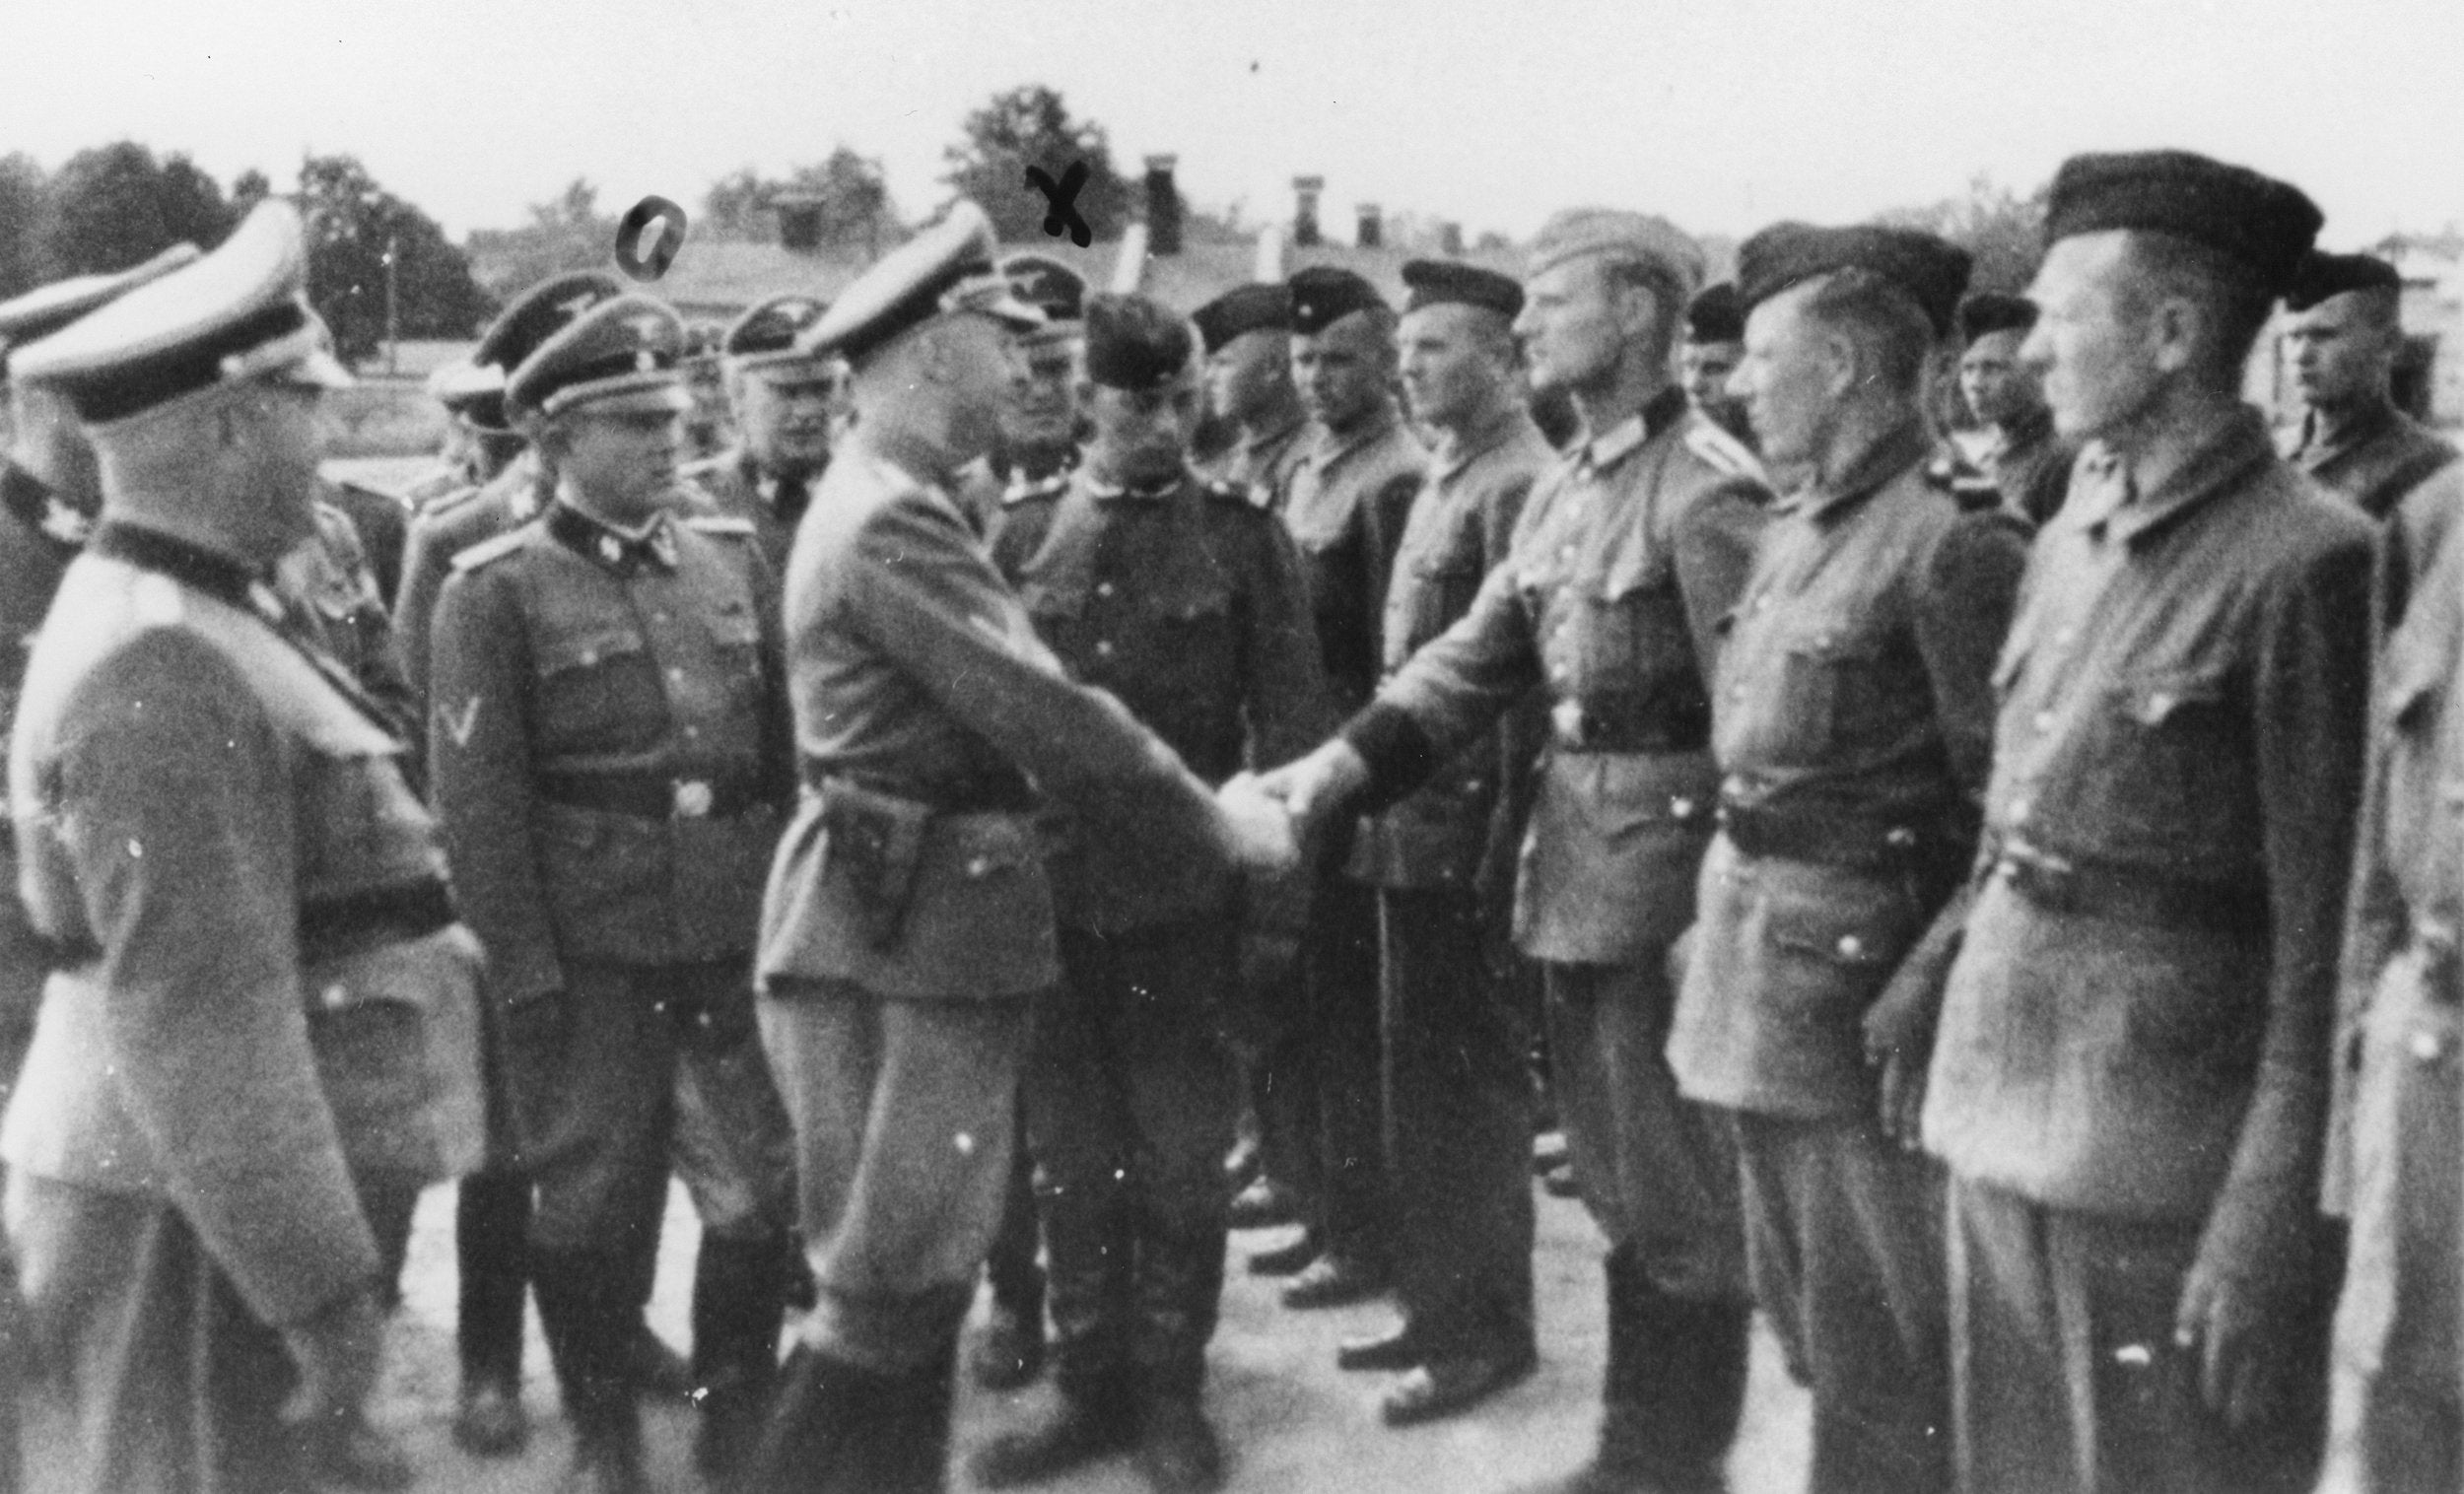 Heinrich Himmler shakes hands with new guard recruits at the Trawniki concentration camp in 1942